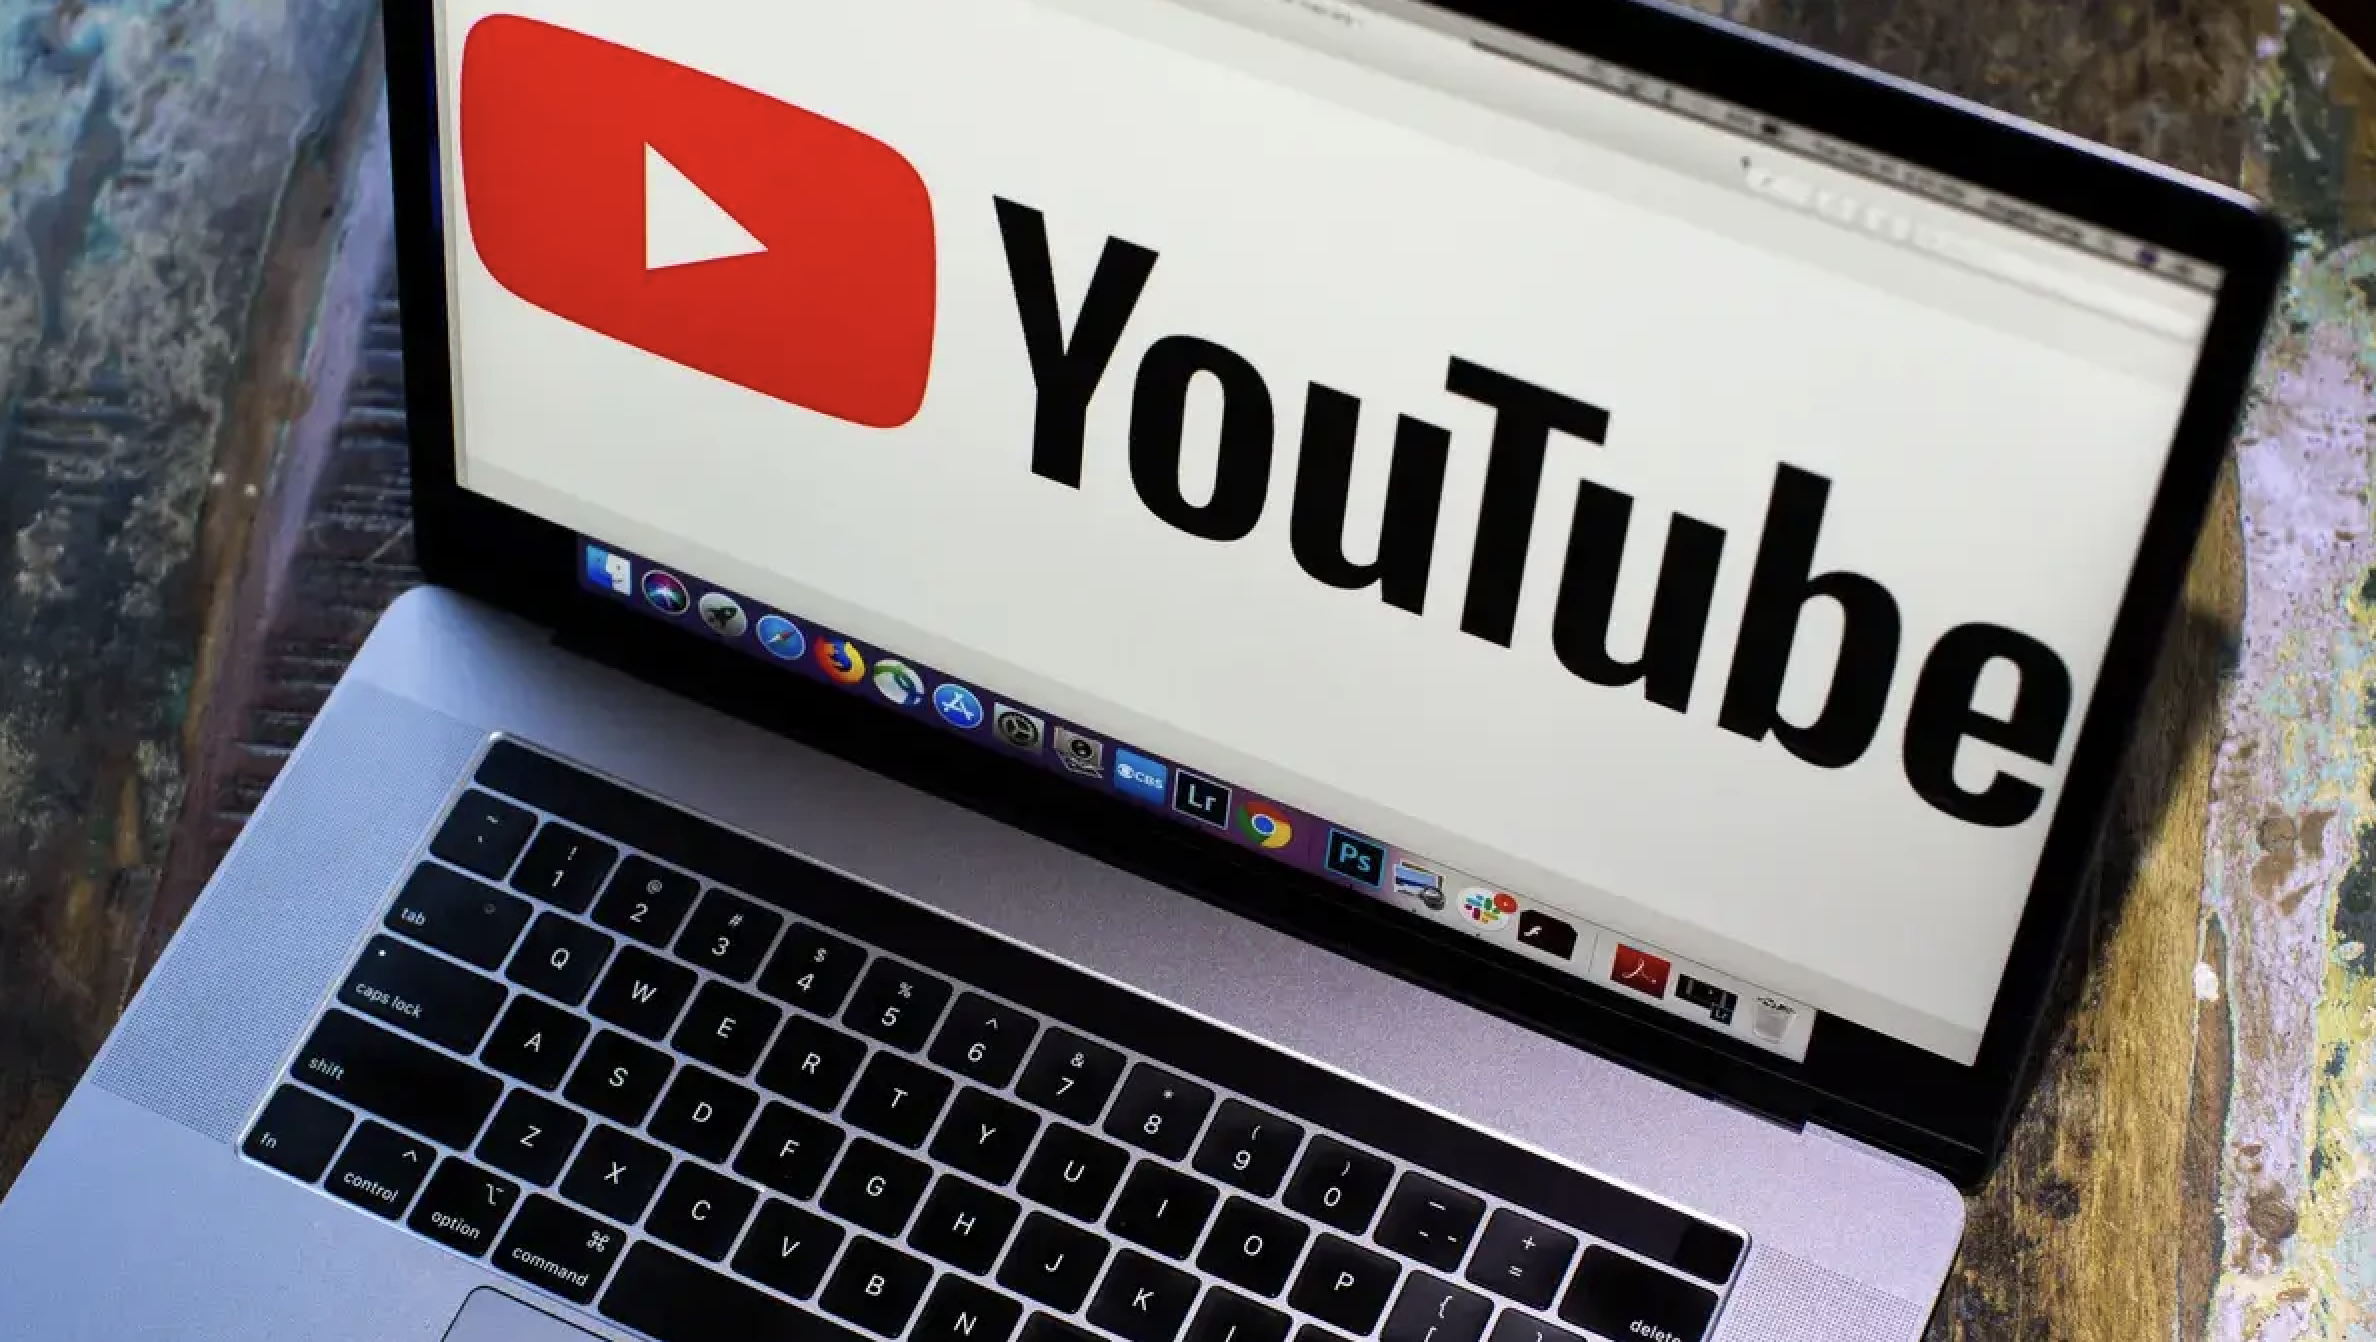 YouTube enters music licensing talks for AI tools after Udio & Suno face lawsuits